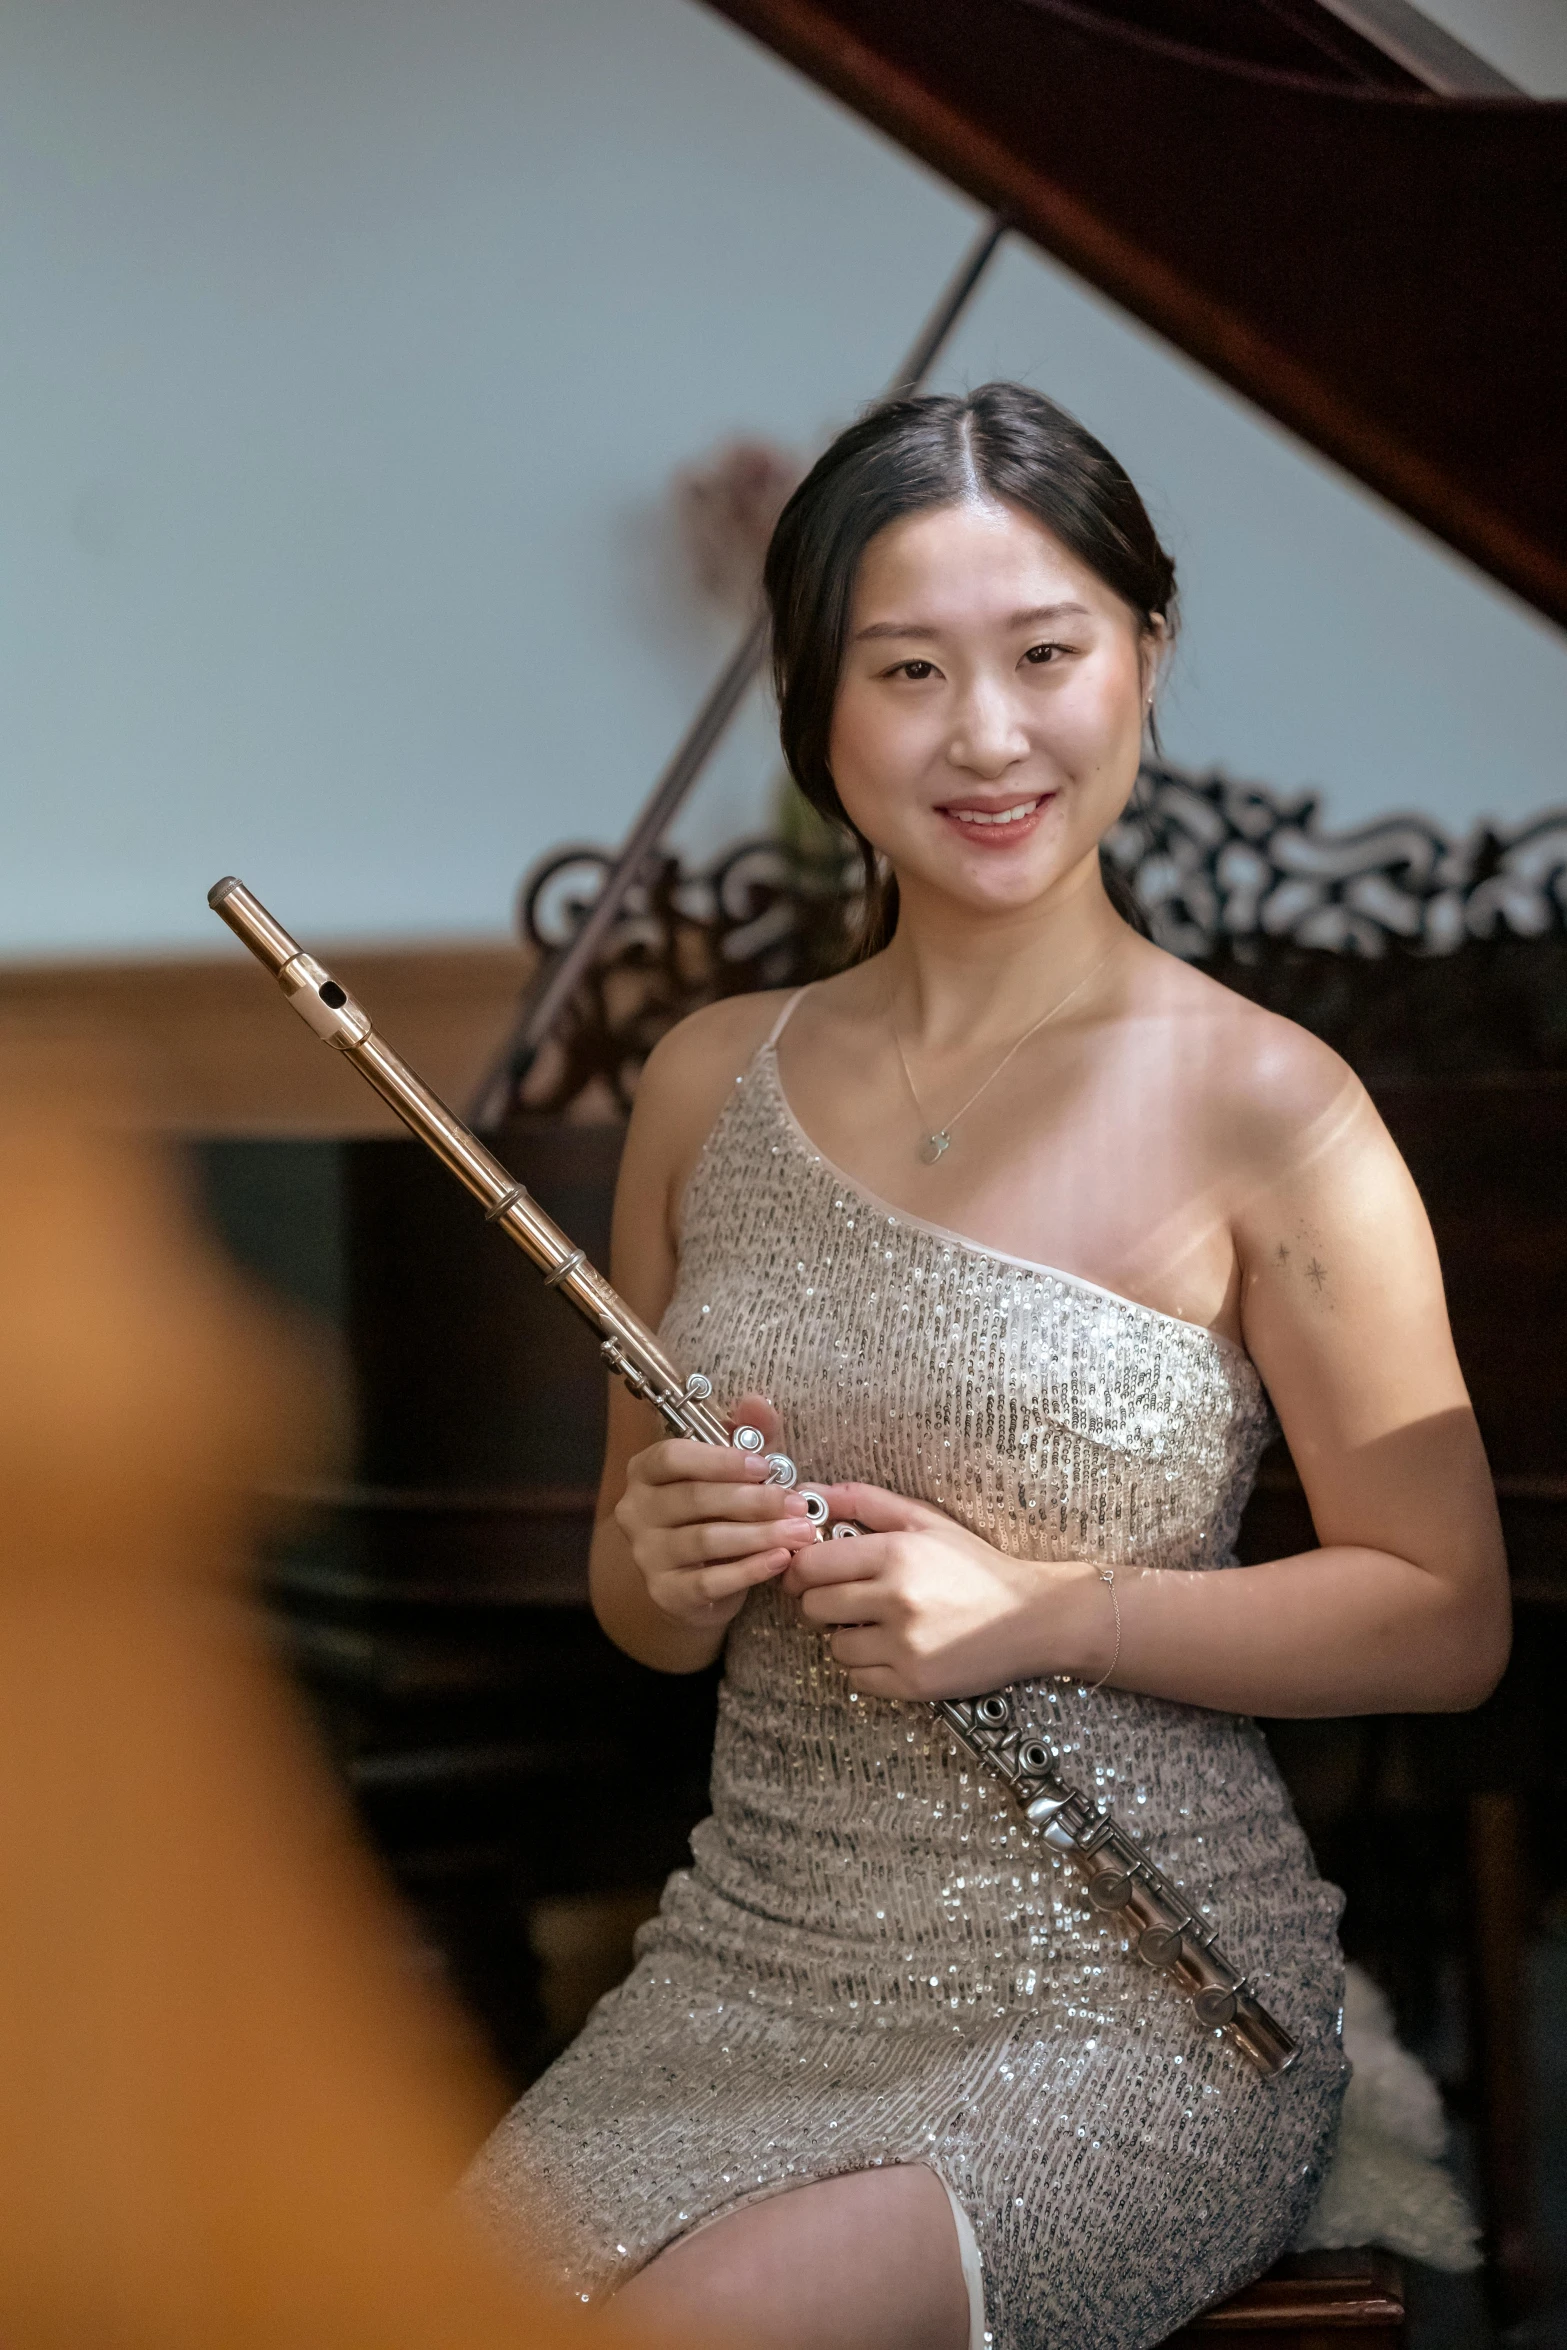 a woman sitting in front of a piano holding a flute, inspired by Zheng Xie, portrait image, ruan jia and brom, no cropping, performing